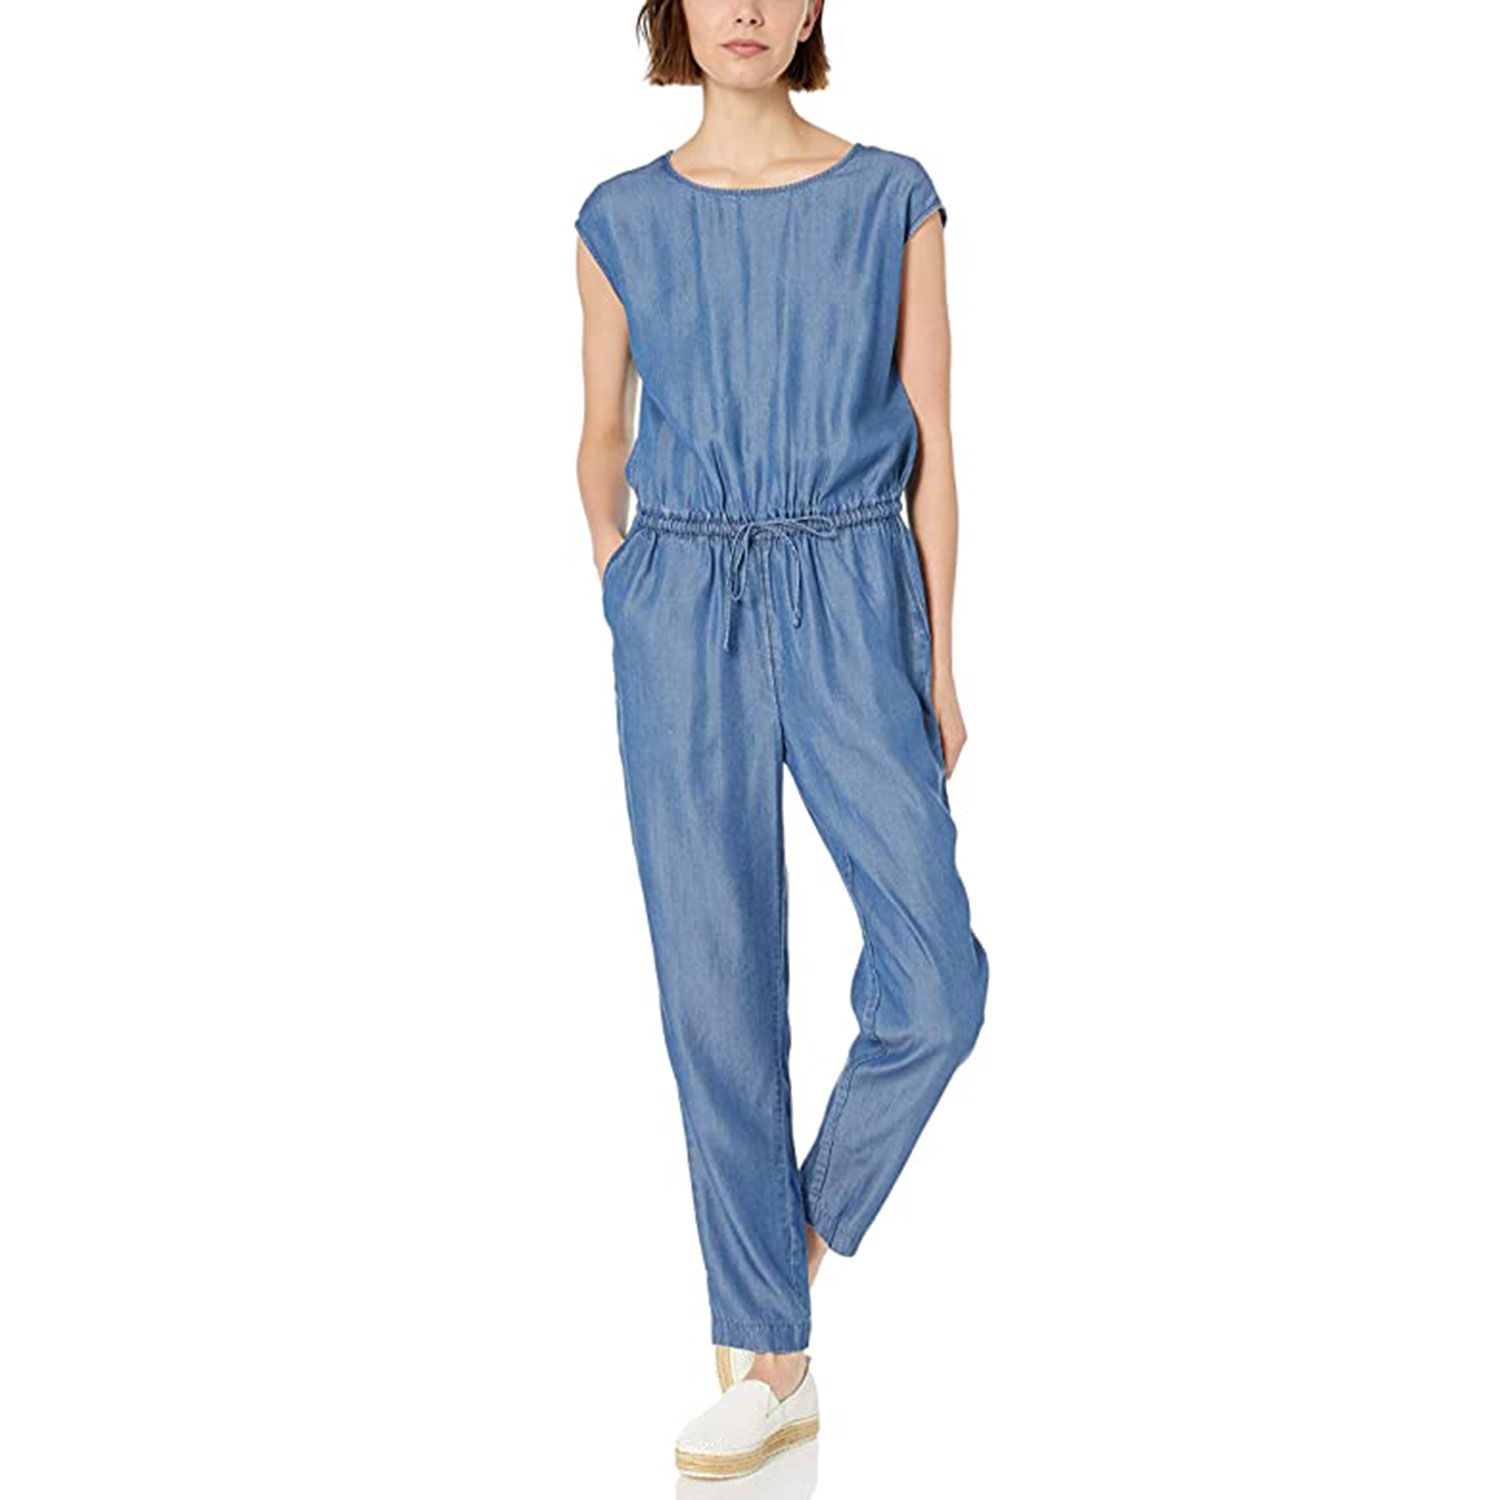 The $40 Daily Ritual Tencel Jumpsuit Is Perfect for Spring | PEOPLE.com